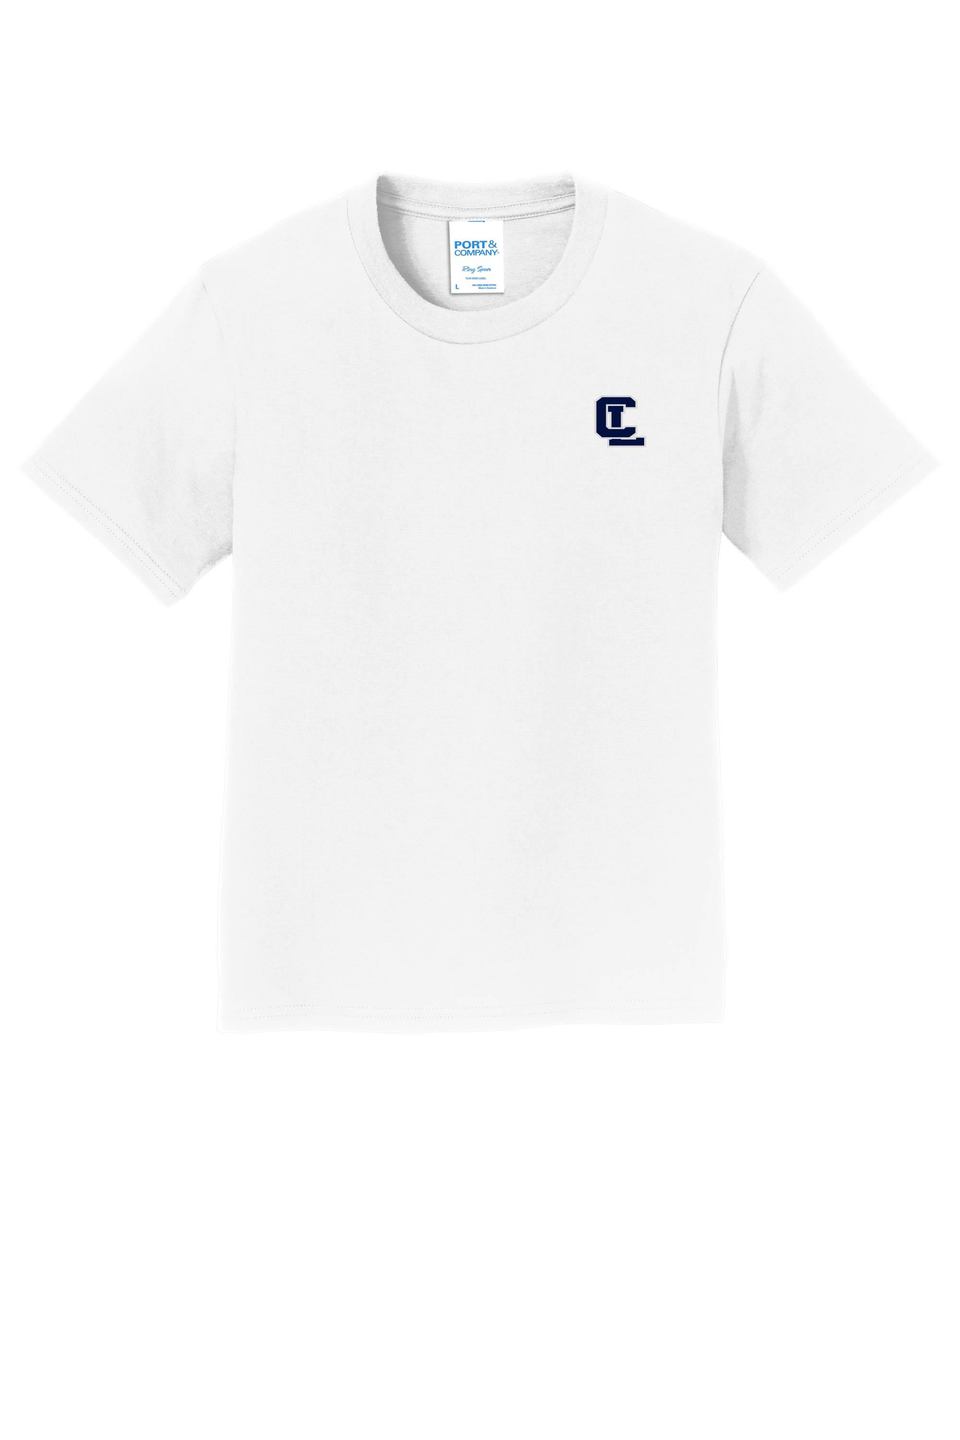 Youth SS Cotton Tee - CL